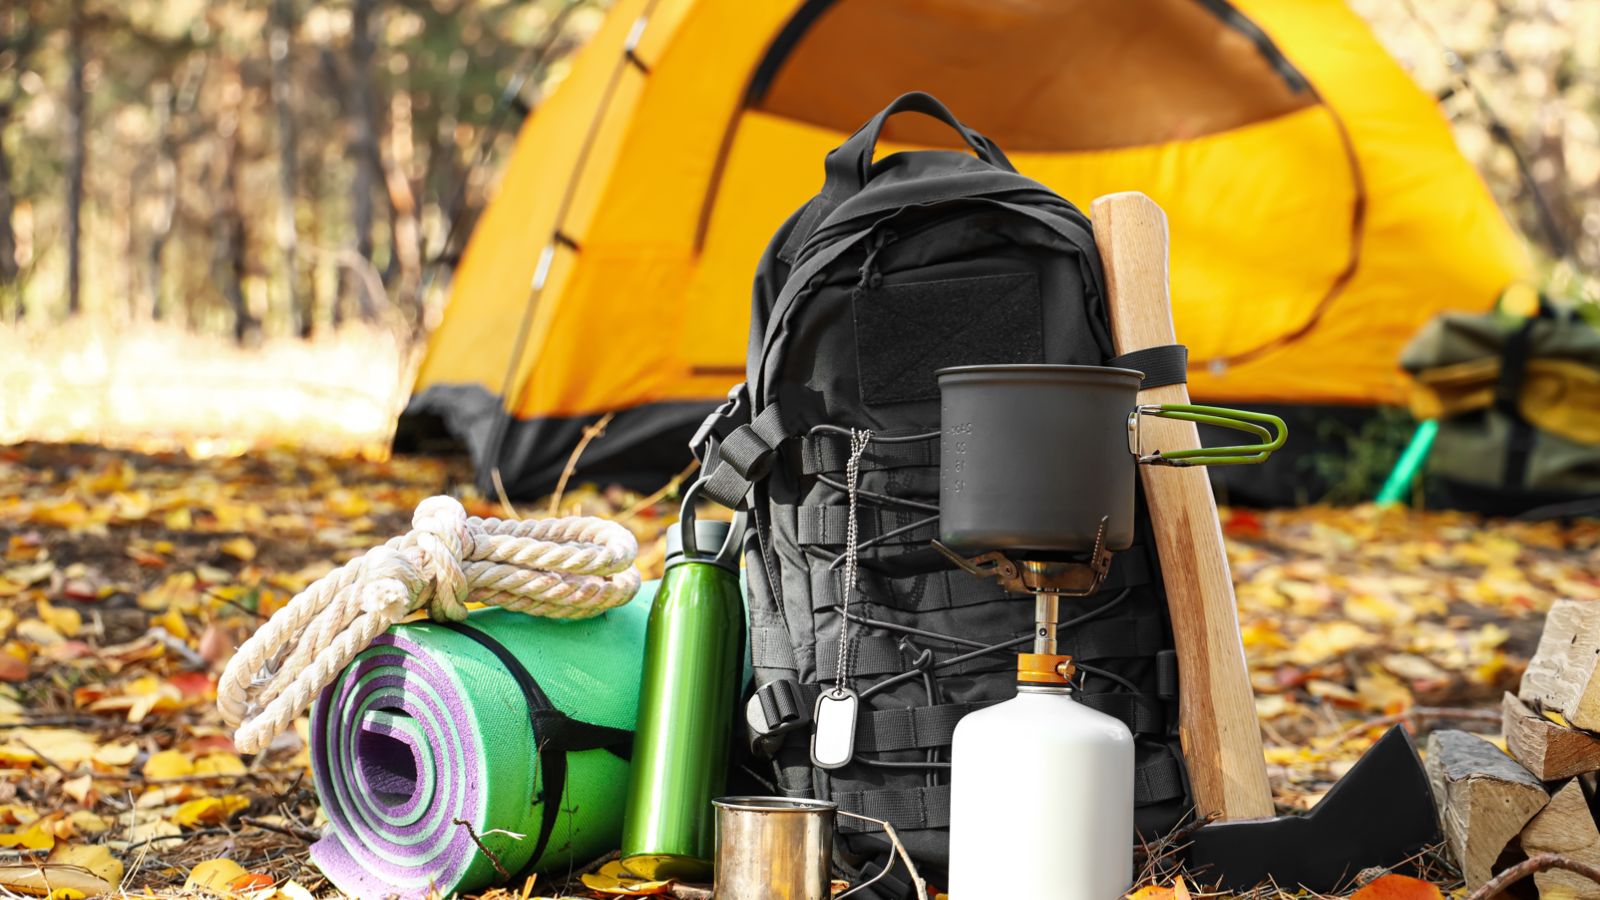 <p>Get ready for any adventure with Target’s outdoor and sporting goods. They offer everything from camping gear to outdoor equipment. If you’re into fitness, they have athletic clothing and products to help you stay active. They even have seasonal outdoor toys for kids to enjoy.</p>